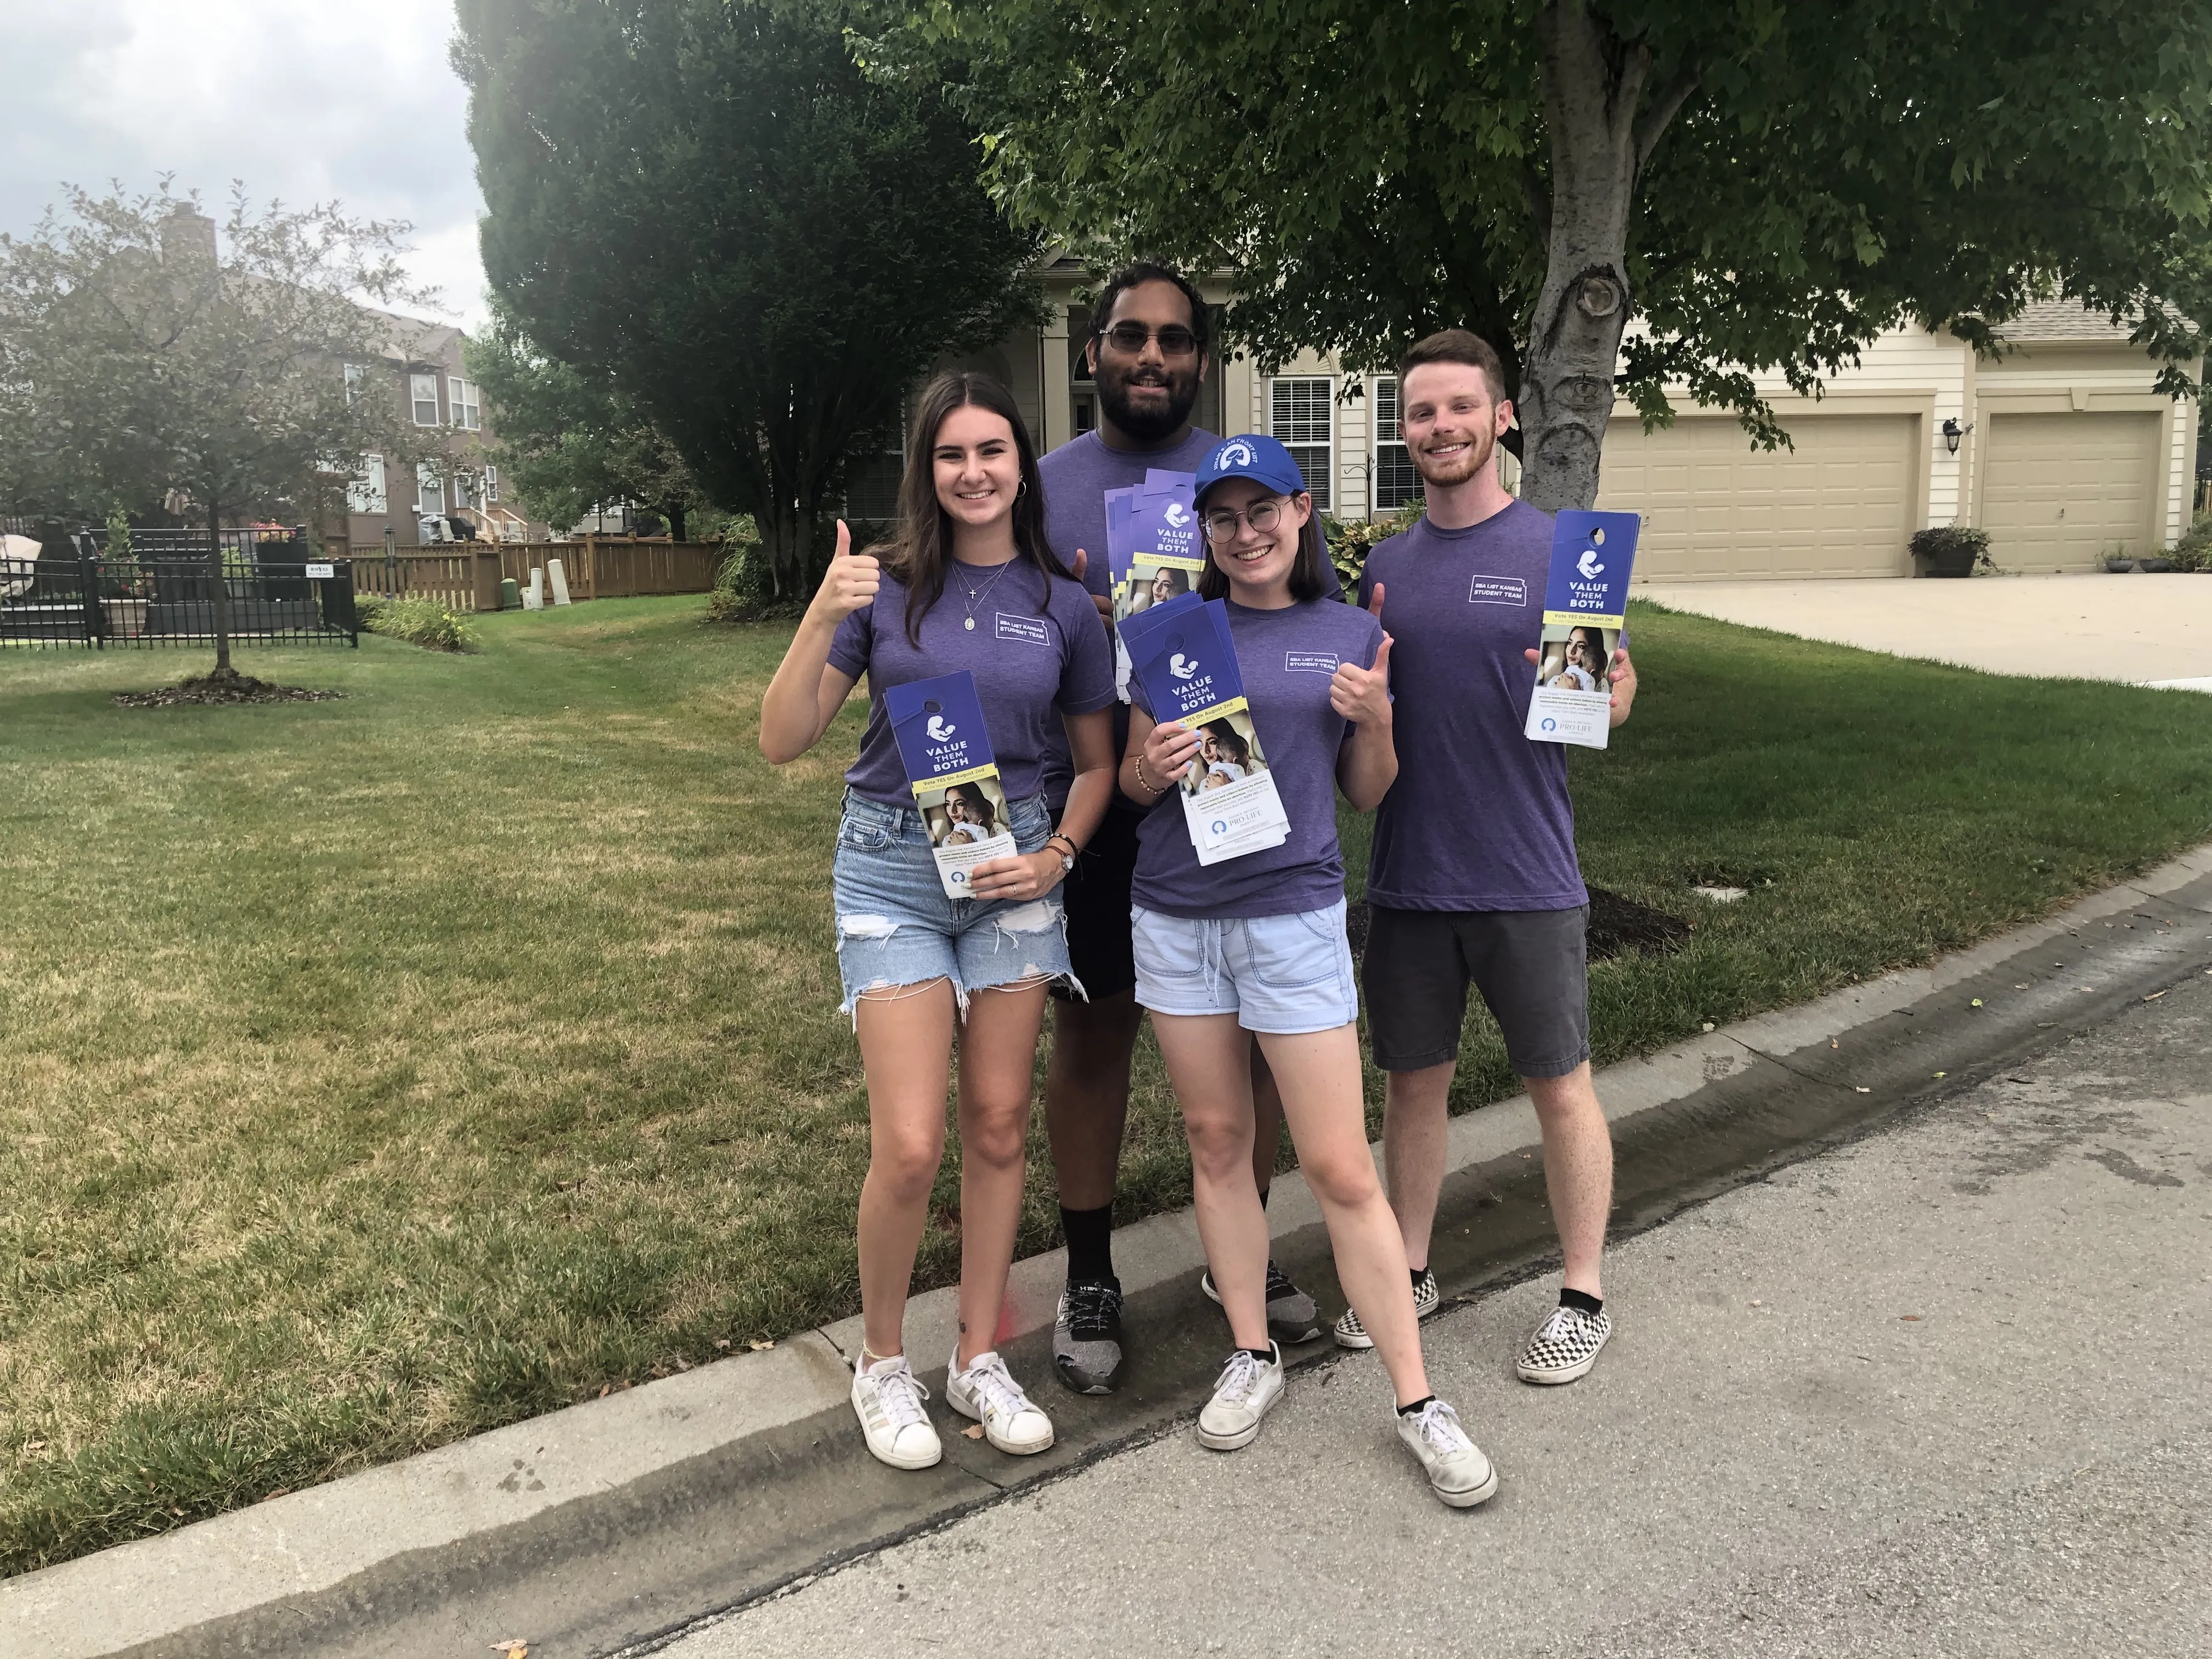 Student canvassers from Susan B. Anthony Pro-Life America visit voters in Olathe, Kan., July 28, 2022.?w=200&h=150